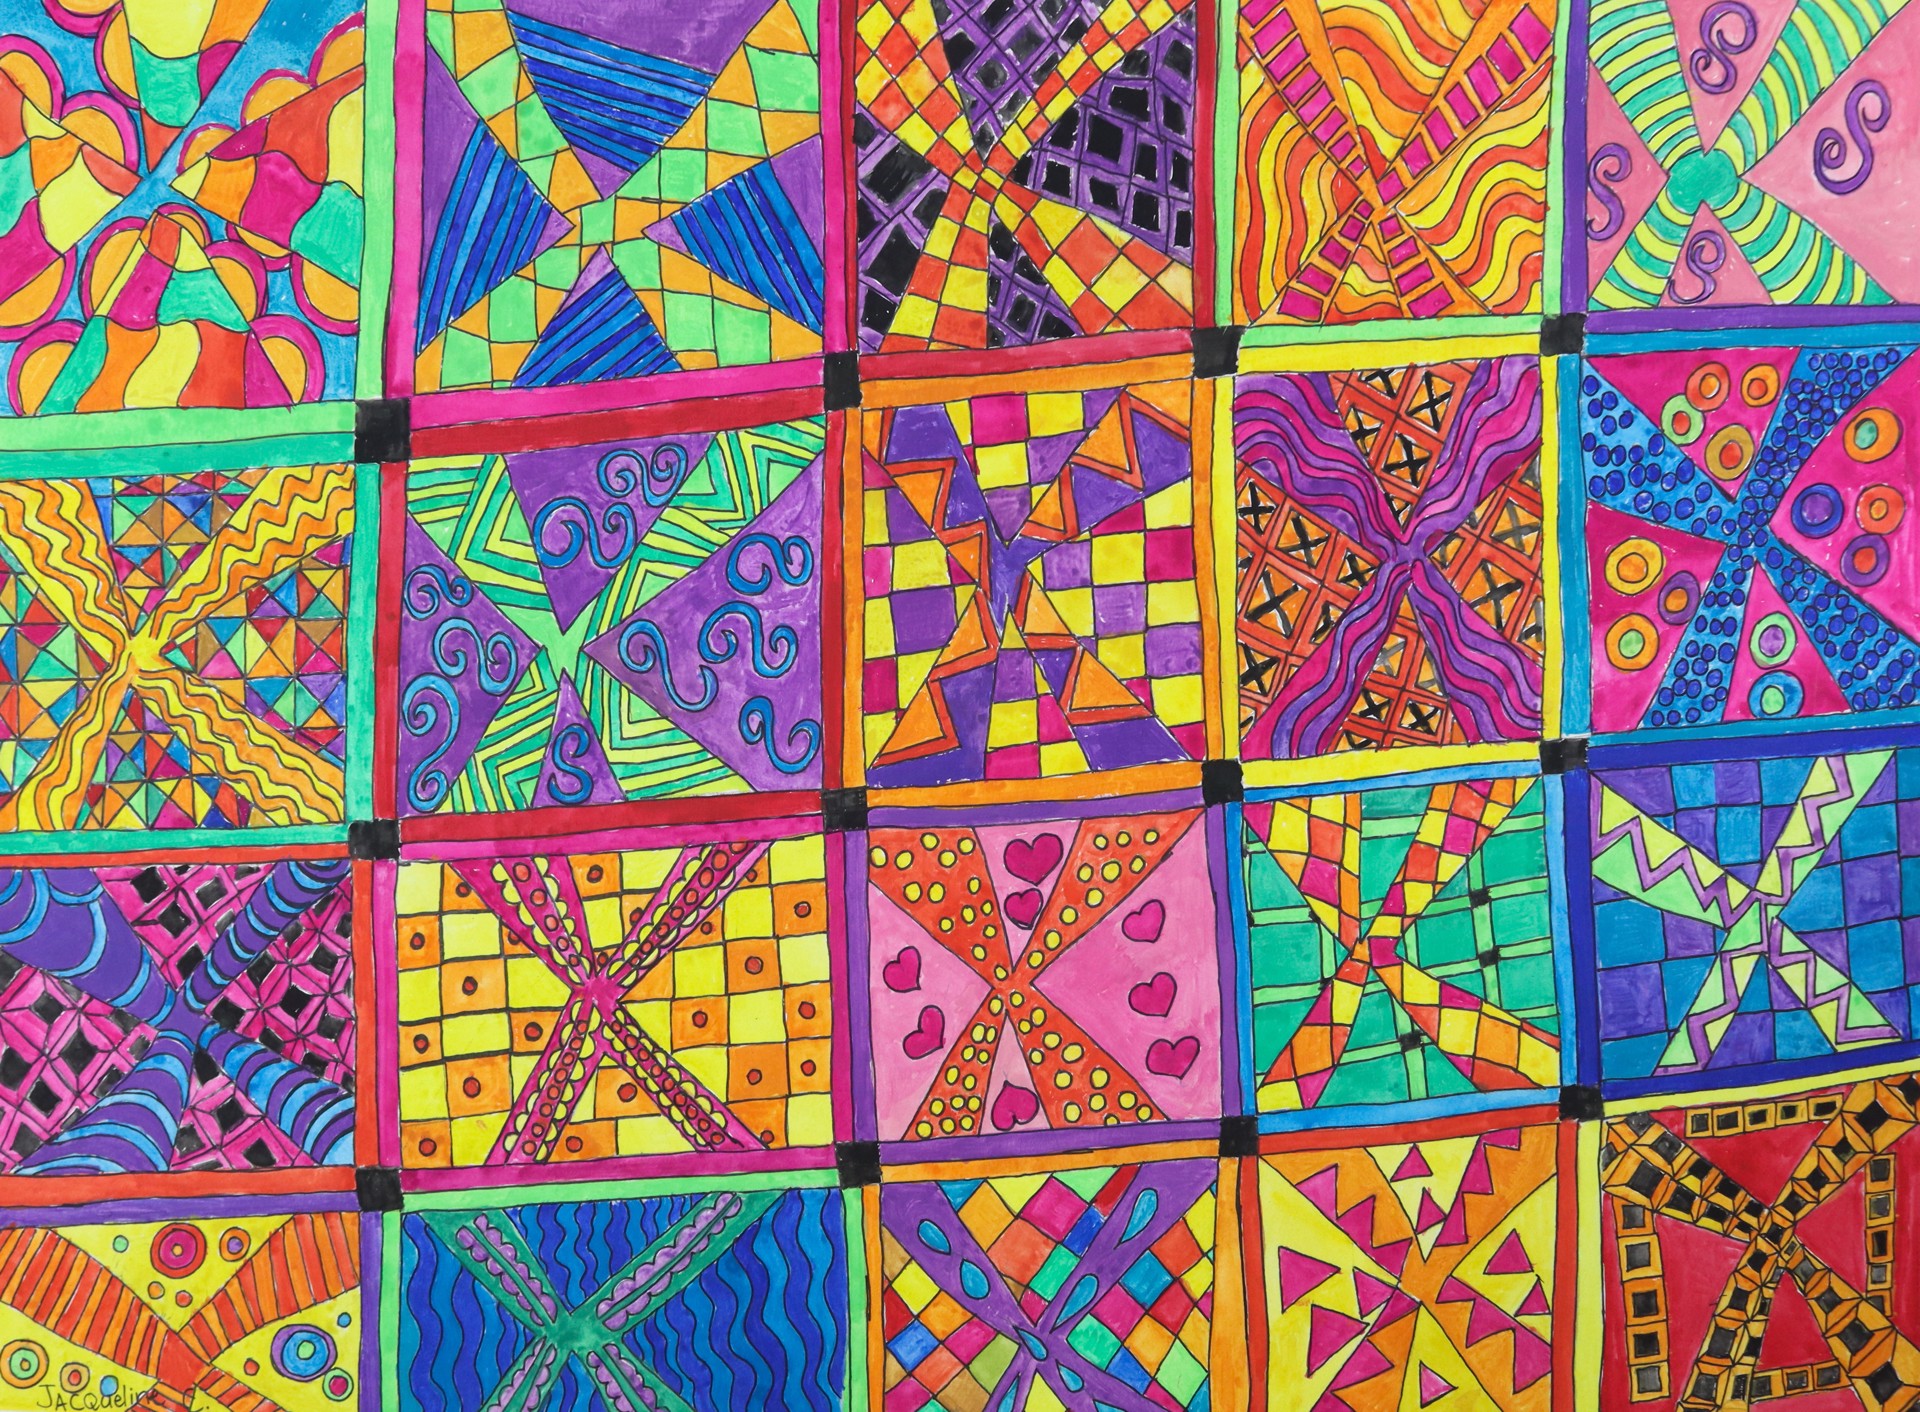 Psychedelic Quilt by Jacqueline Coleman